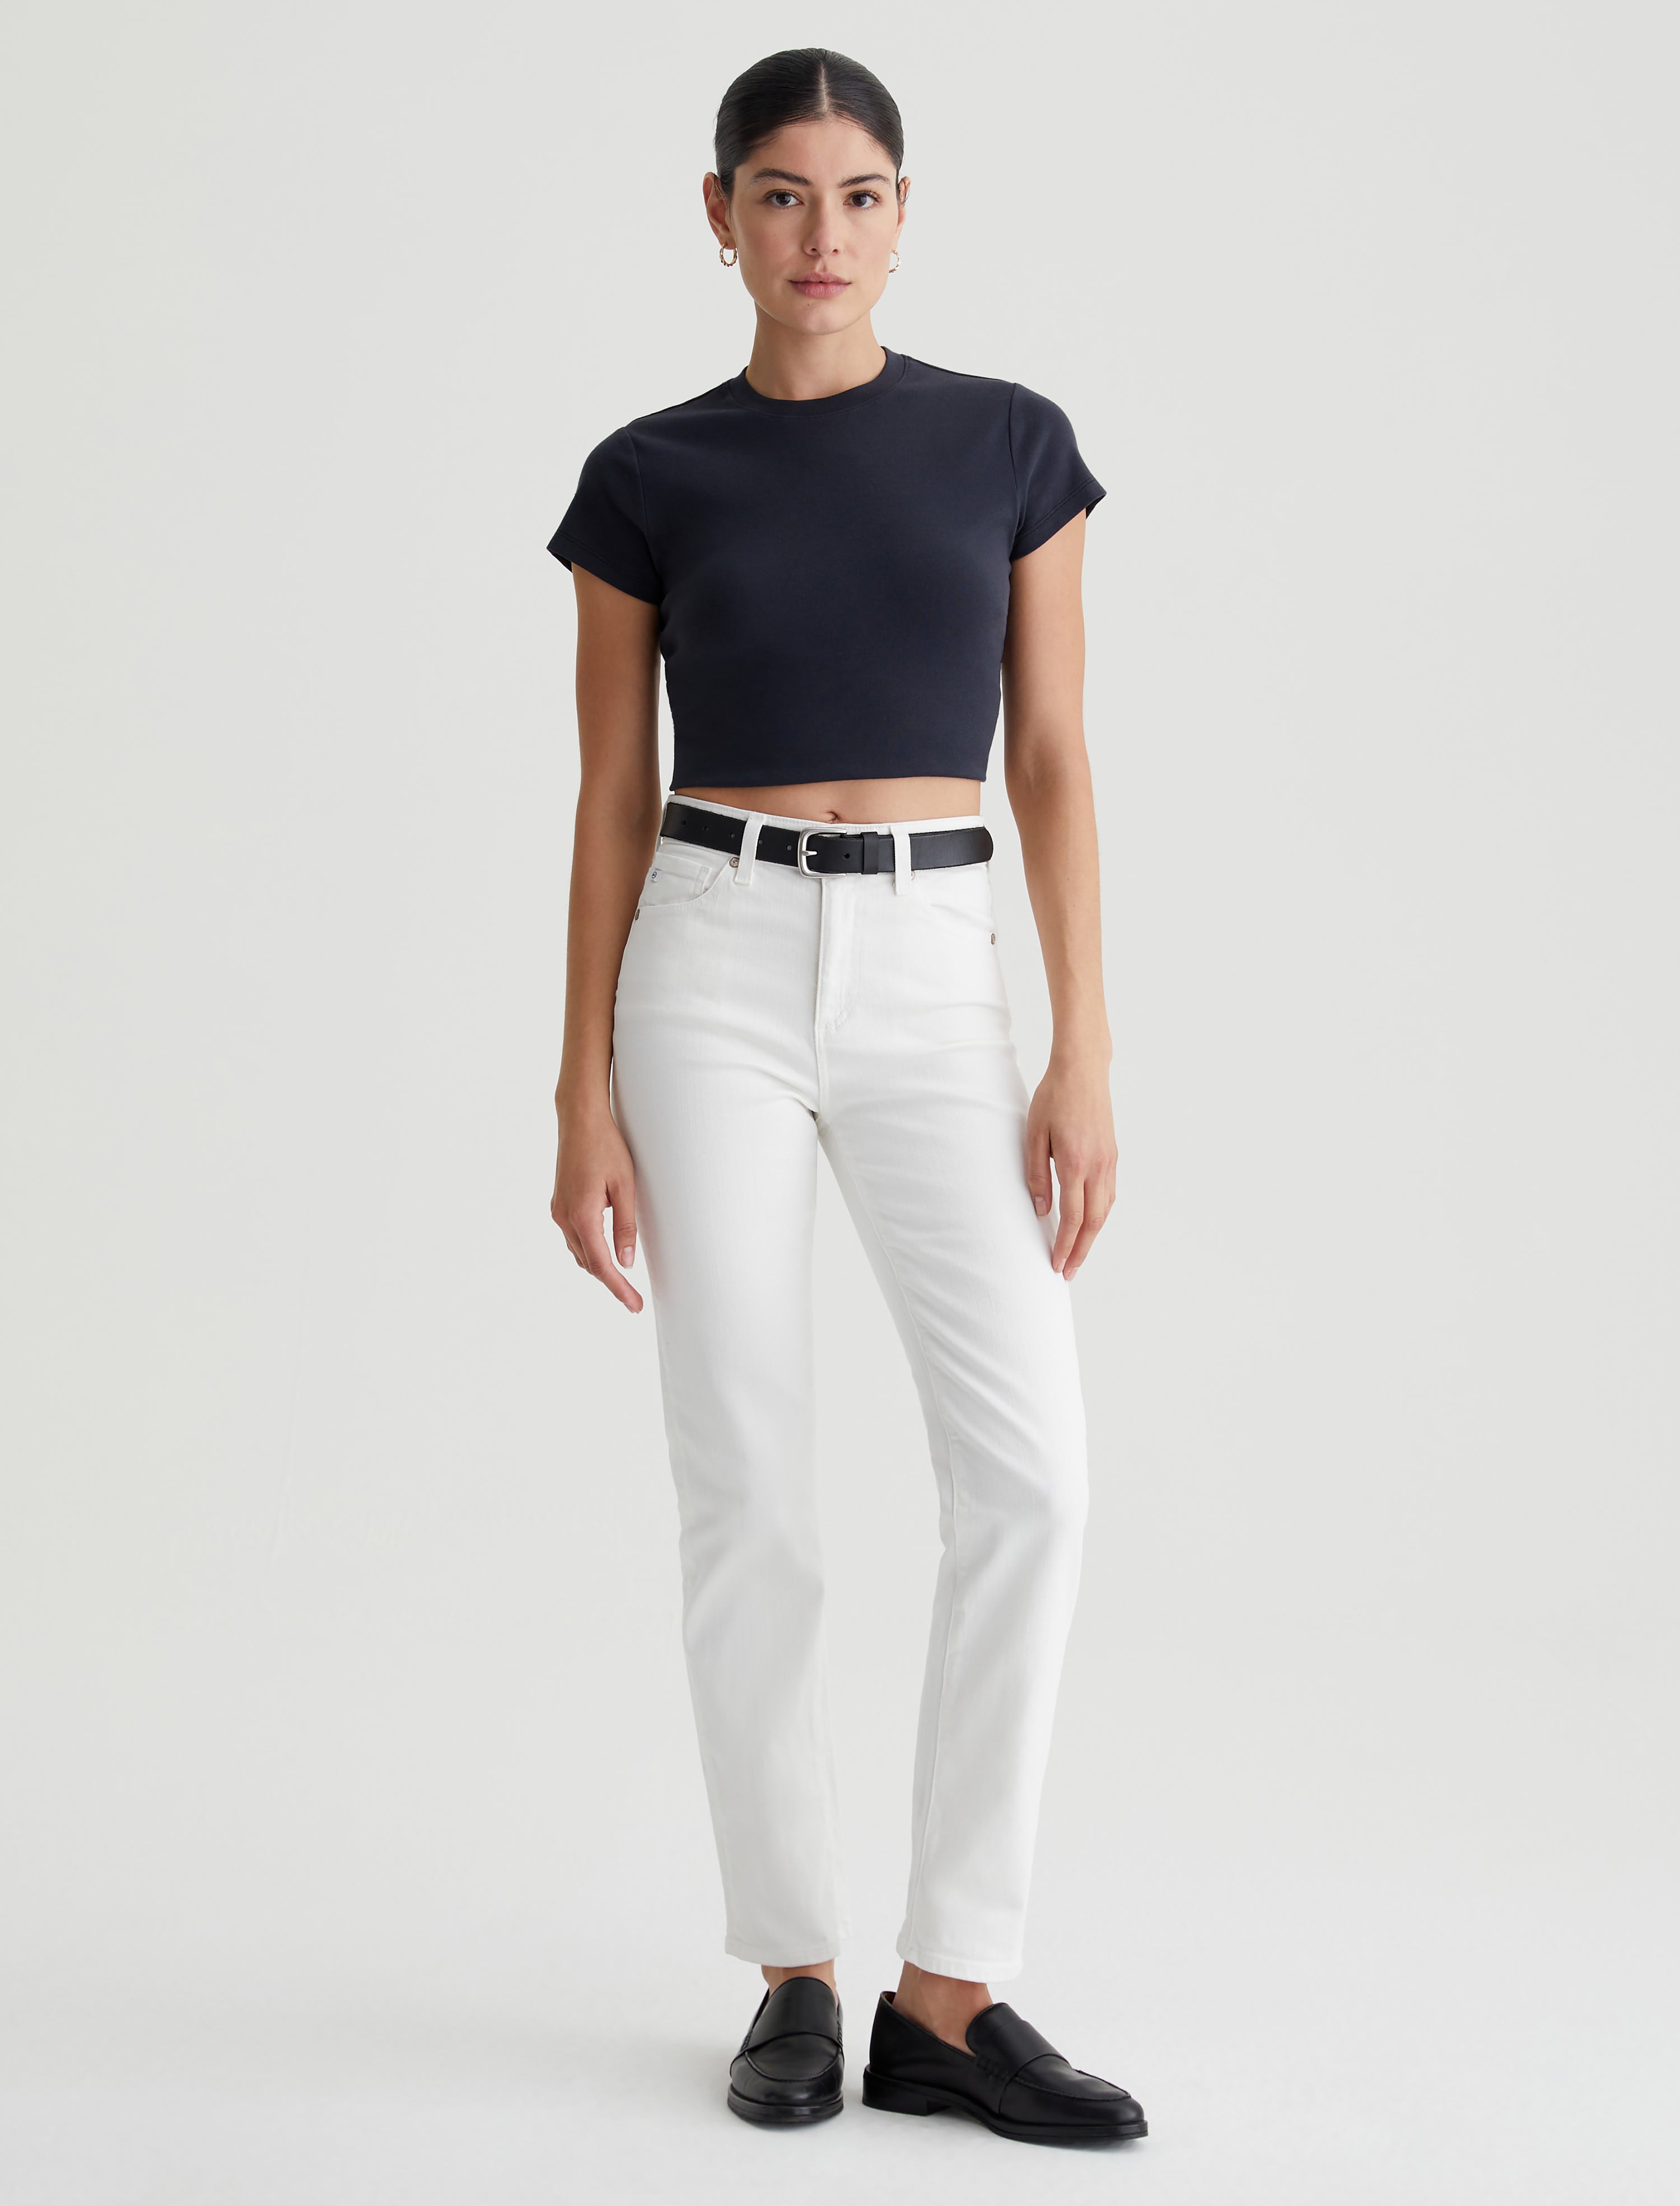 Womens Alexxis Modern White at AG Jeans Official Store